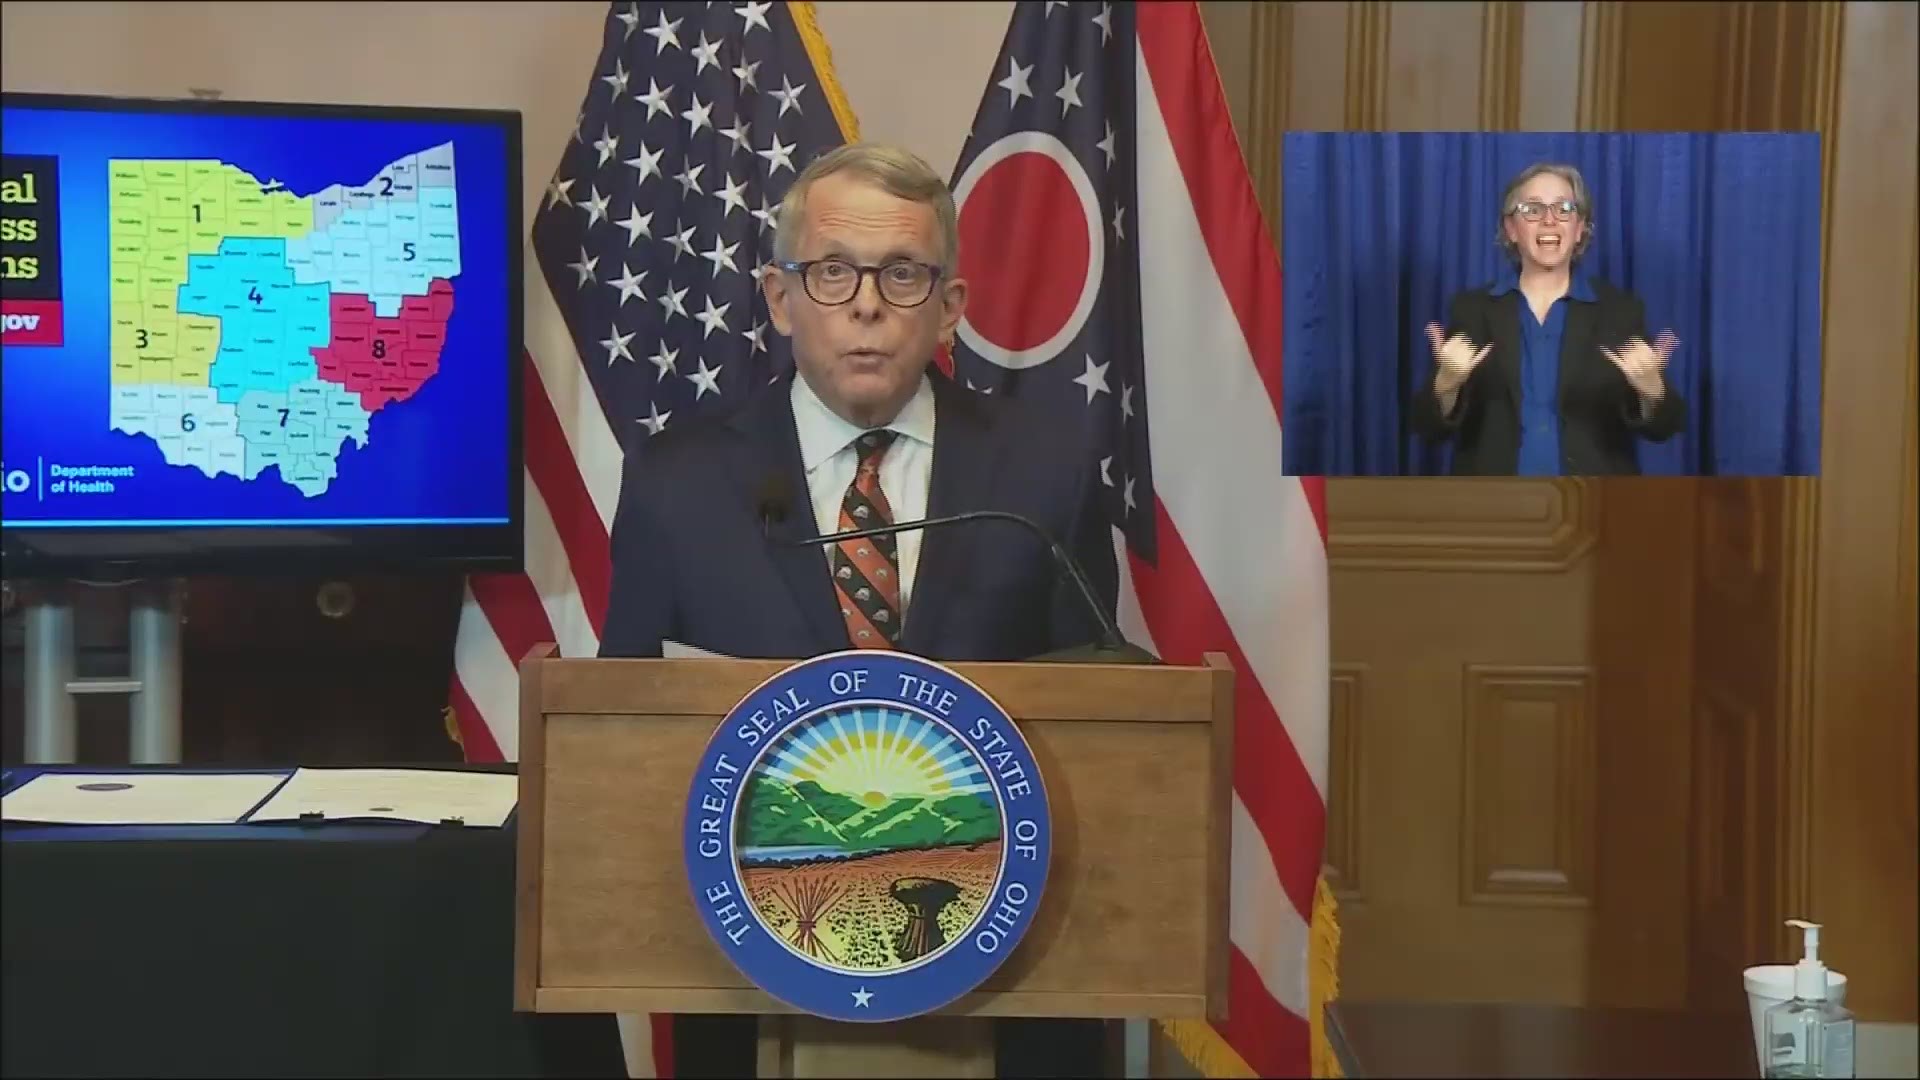 Governor Mike DeWine forms Ohio Manufacturing Alliance to fight COVID-19.  It's a collaborative public/private partnership.